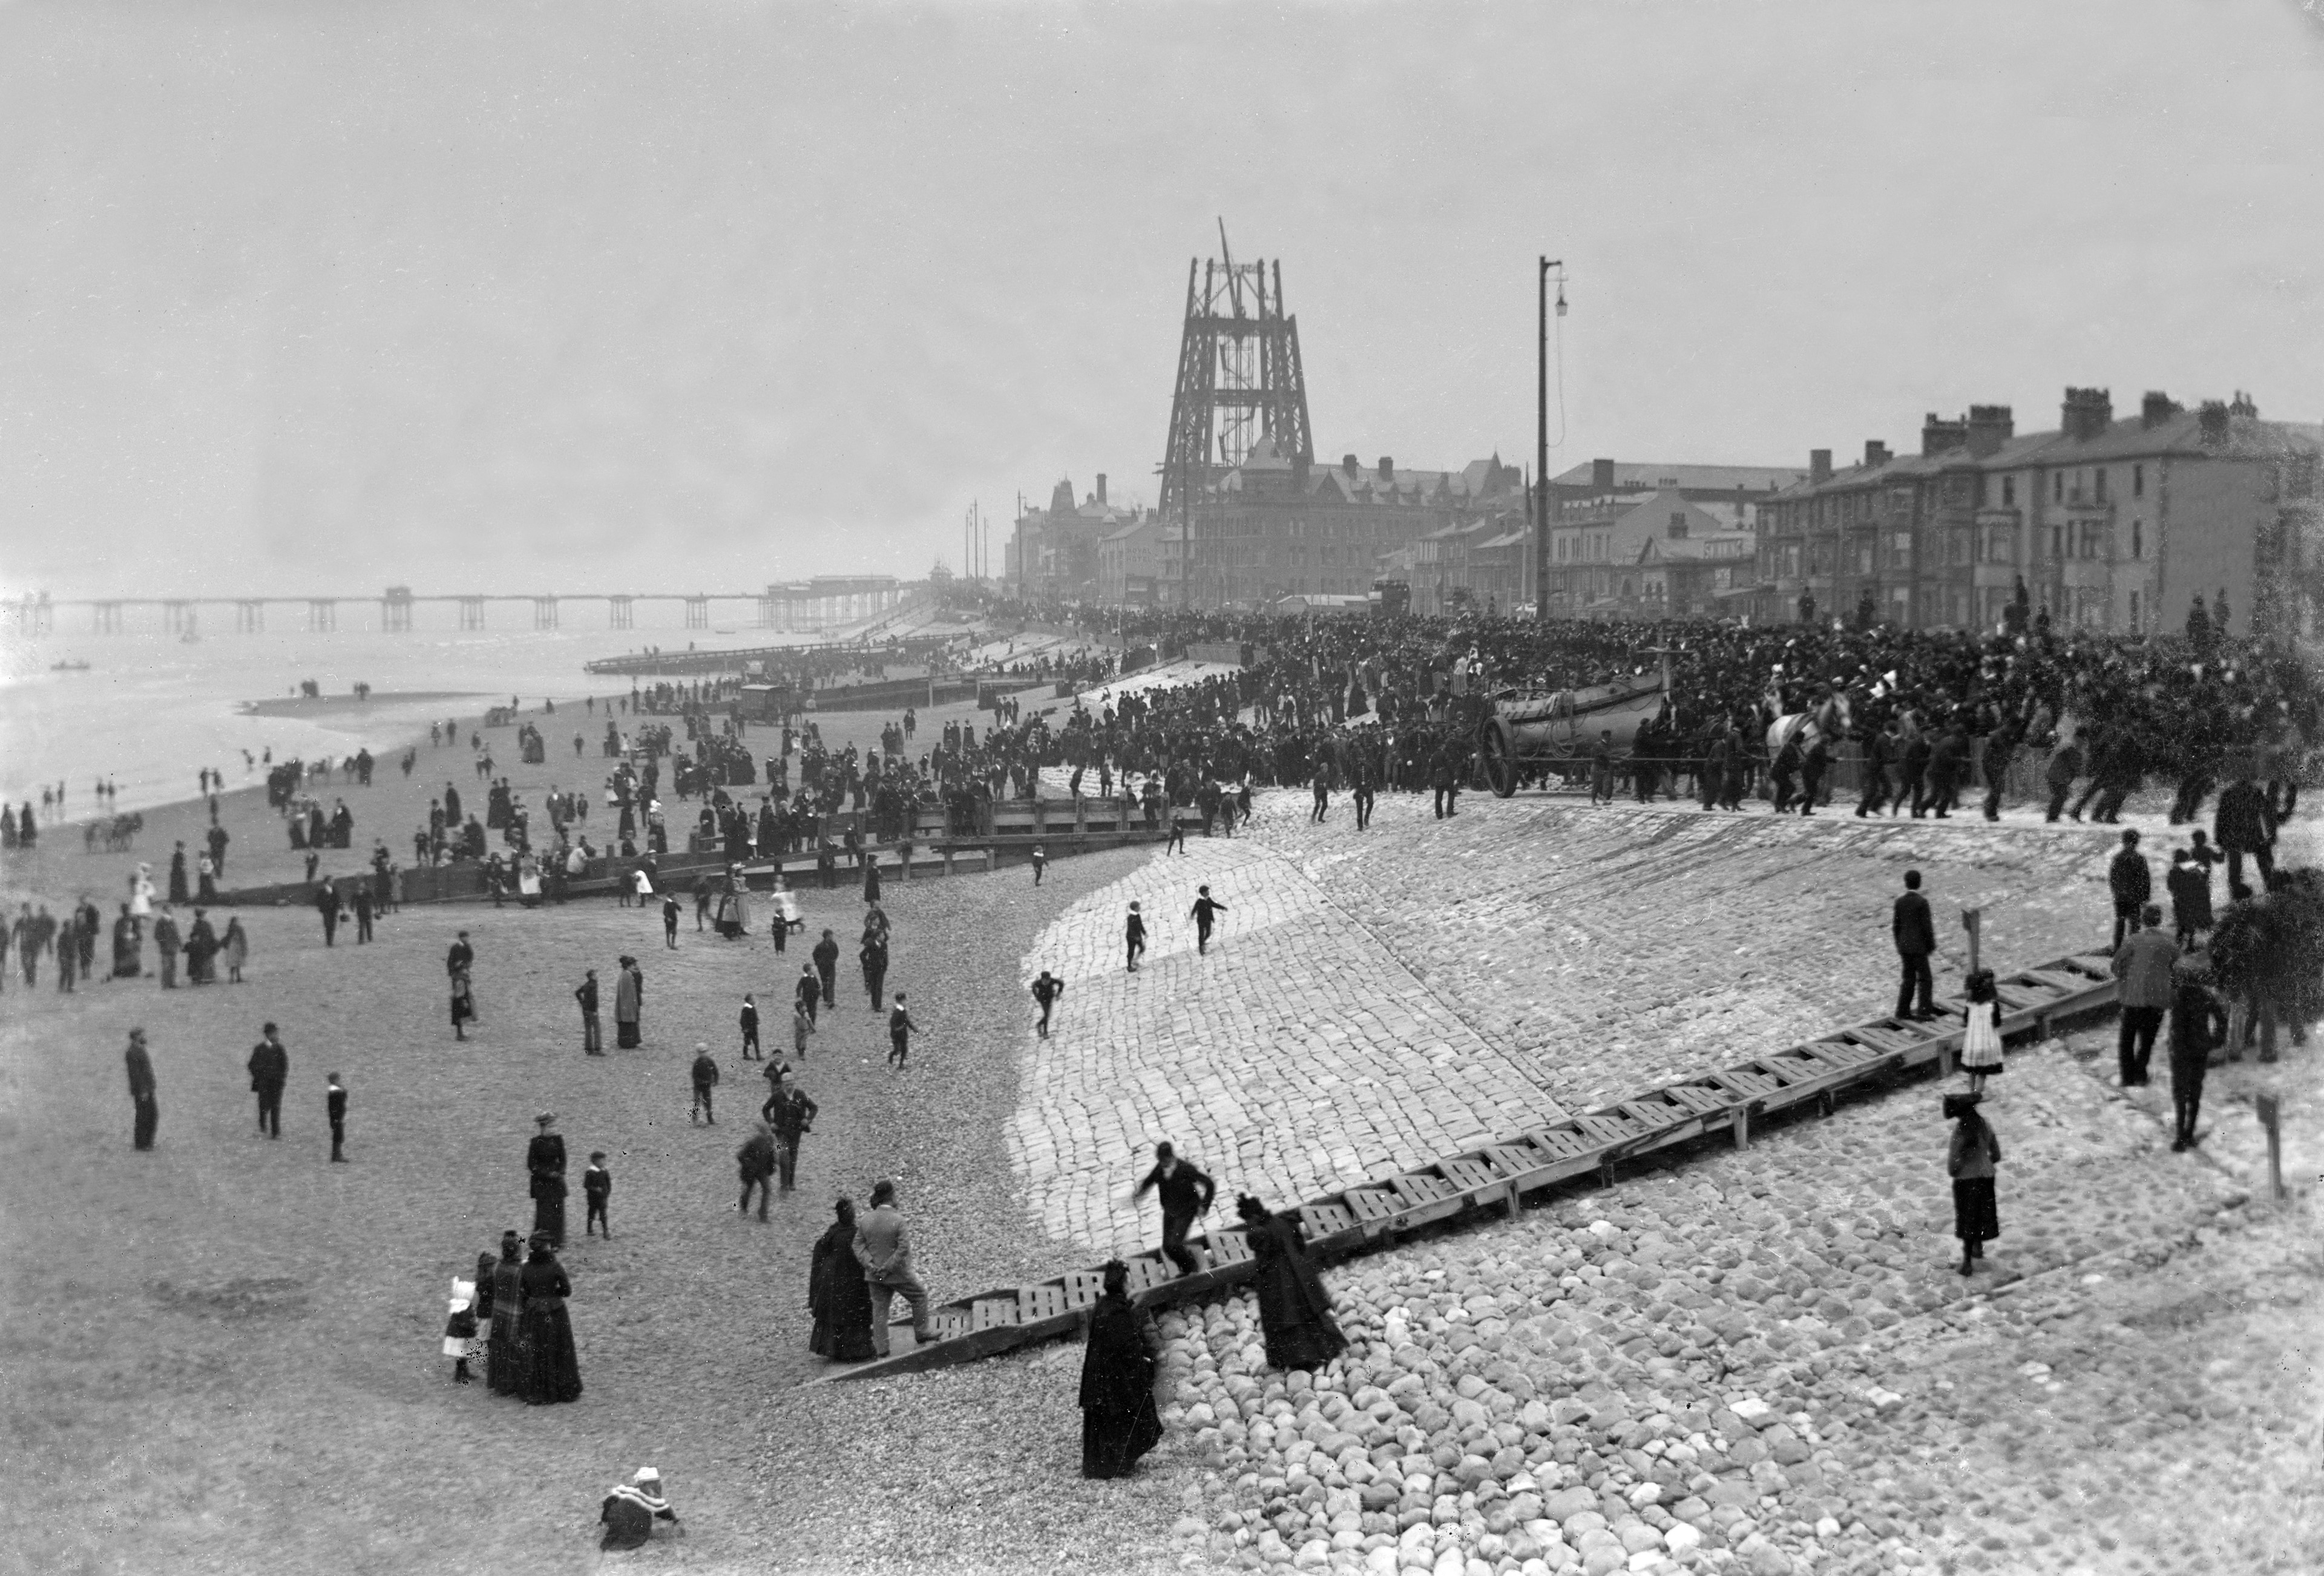 Trialed Watson Lifeboat Beach  Blackpool Tower Spring 1893 - History